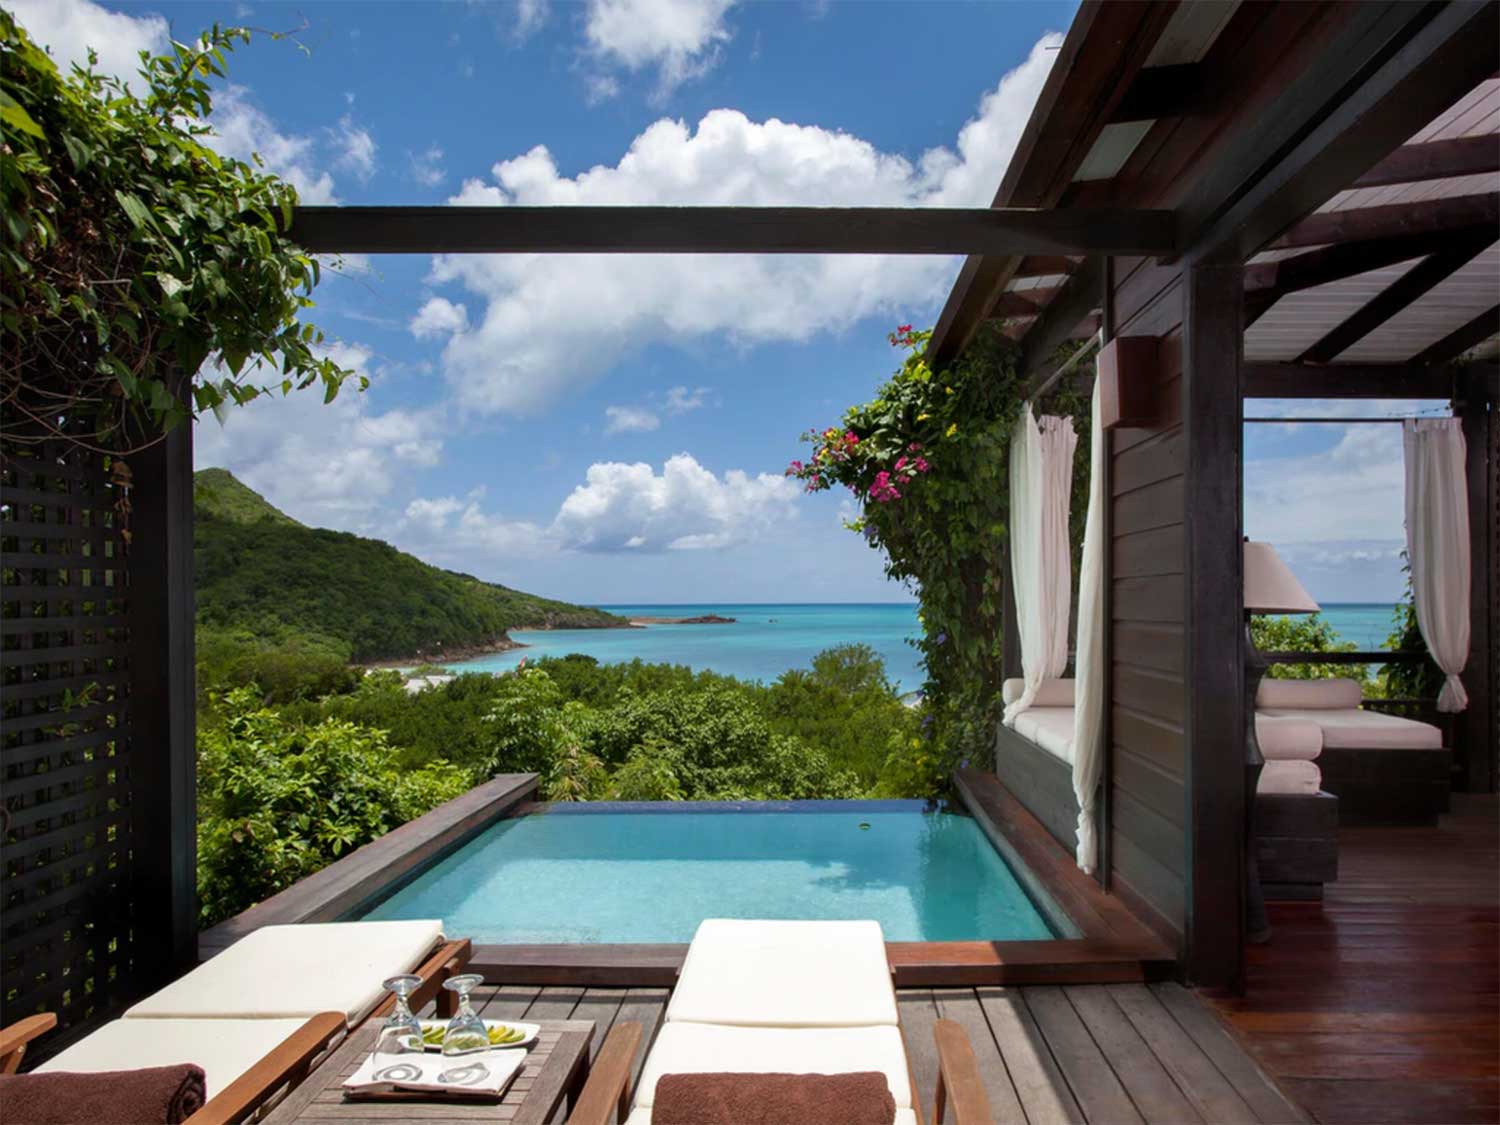 A single pool at a resort overlooking lush, tropical mountains and the ocean.